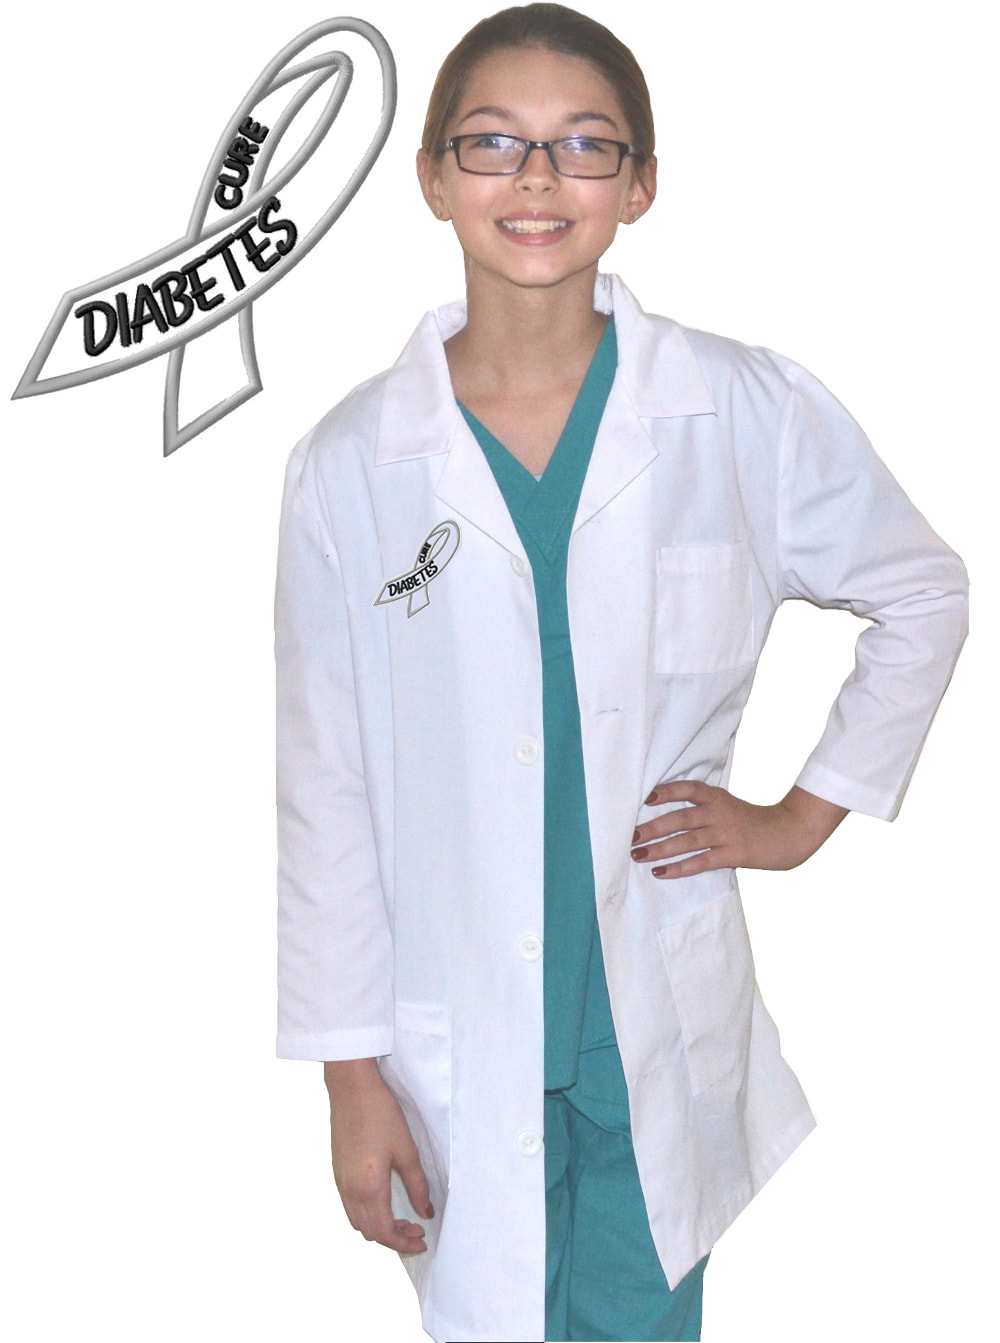 Kids Lab Coat with Cure Diabetes Ribbon Embroidery Design